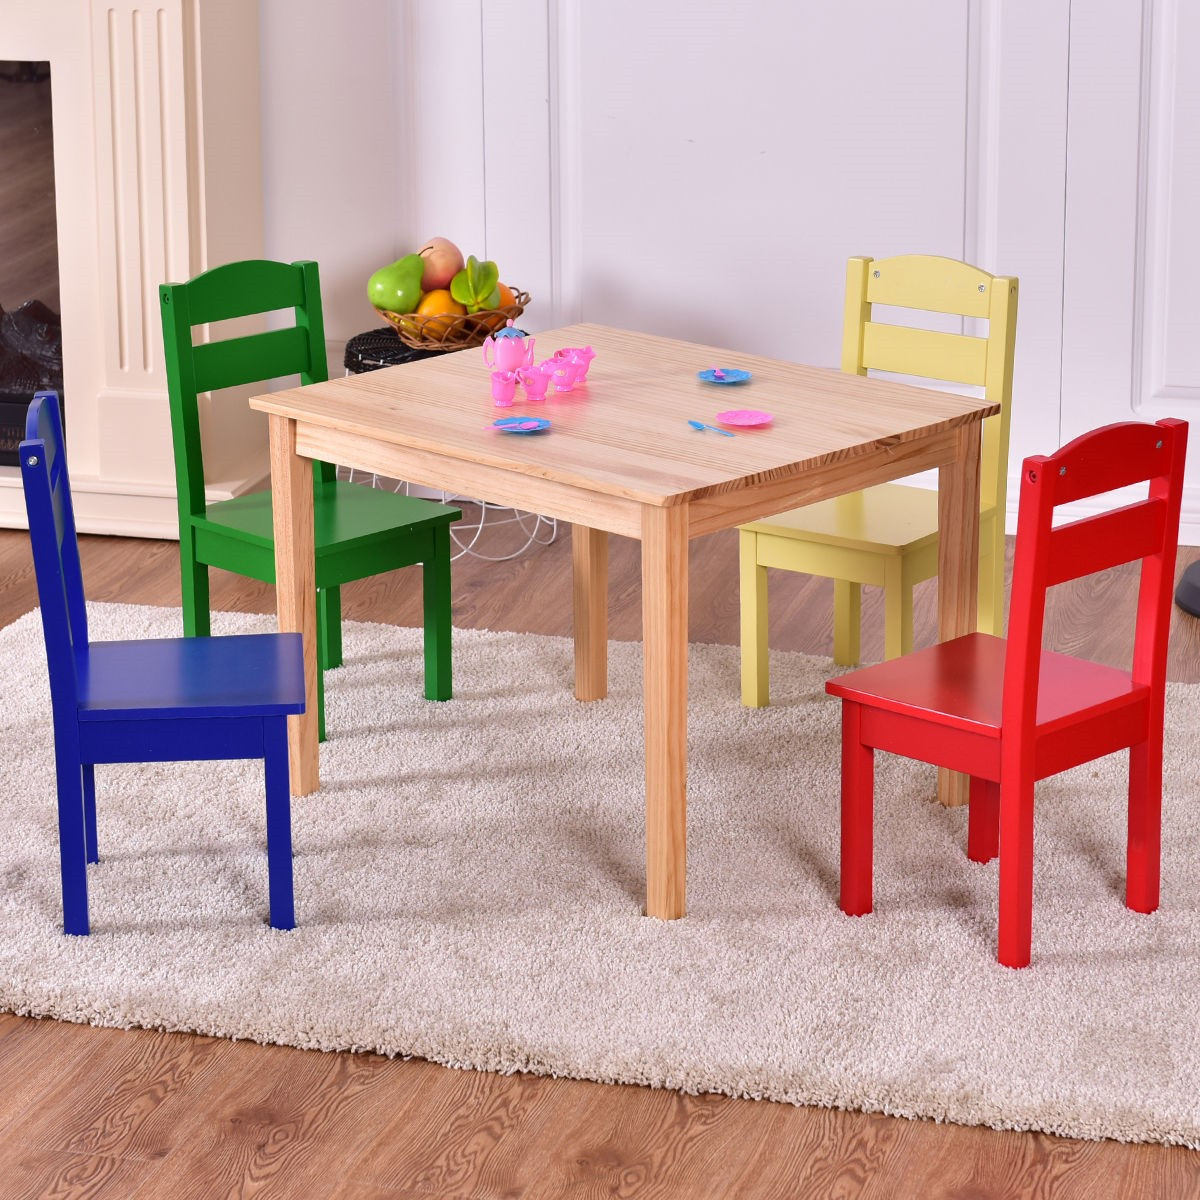 Kids Table And Chairs
 Costway Kids 5 Piece Table Chair Set Pine Wood Multicolor